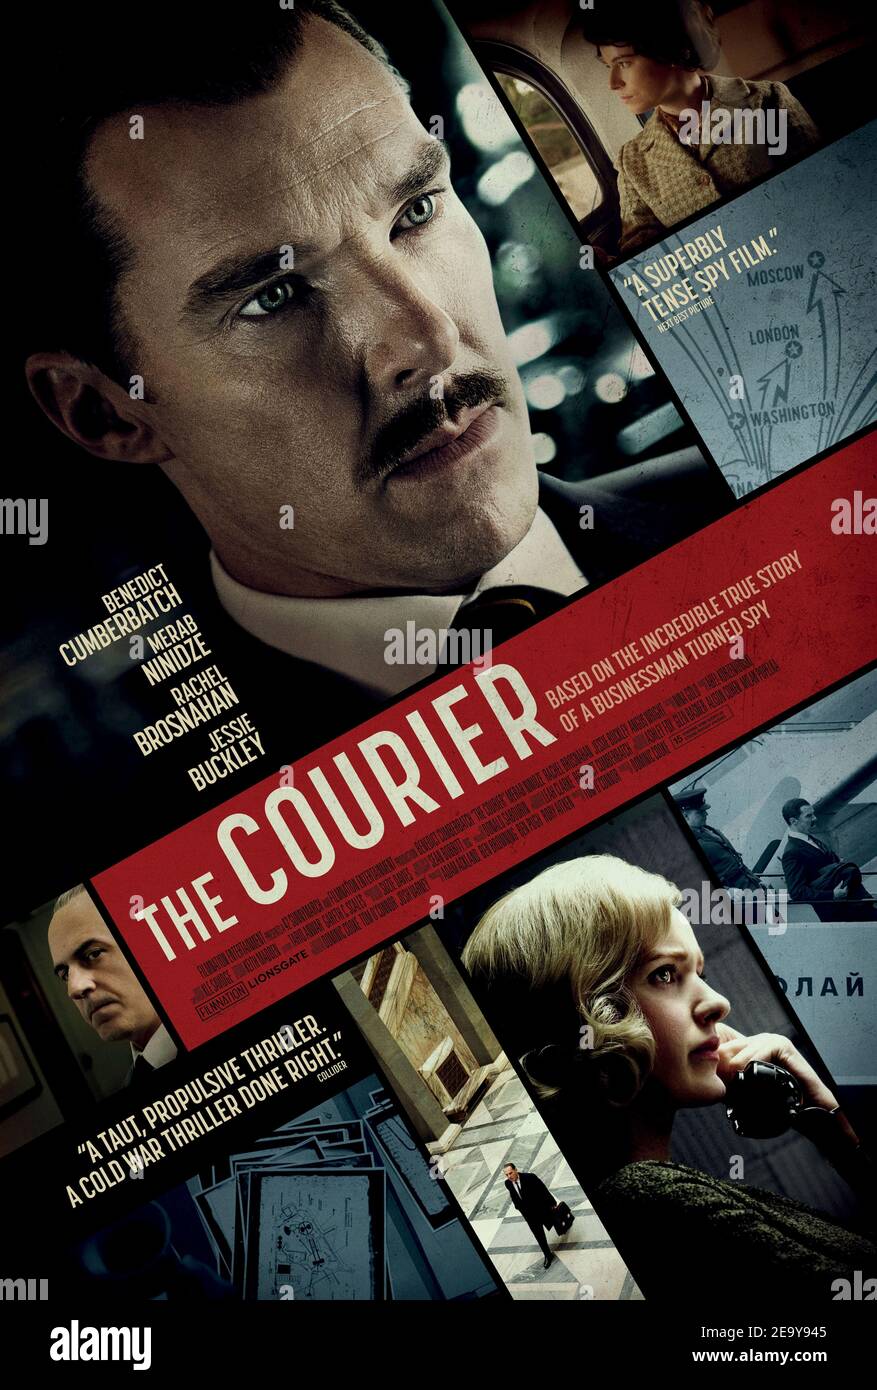 The Courier (2020) directed by Dominic Cooke and starring Benedict Cumberbatch, Merab Ninidze and Rachel Brosnahan. Cold War spy based on the true story of British businessman Greville Wynne recruitment to MI6 and his Soviet agent Oleg Penkovsky who try to put an end to the Cuban Missile Crisis. Stock Photo